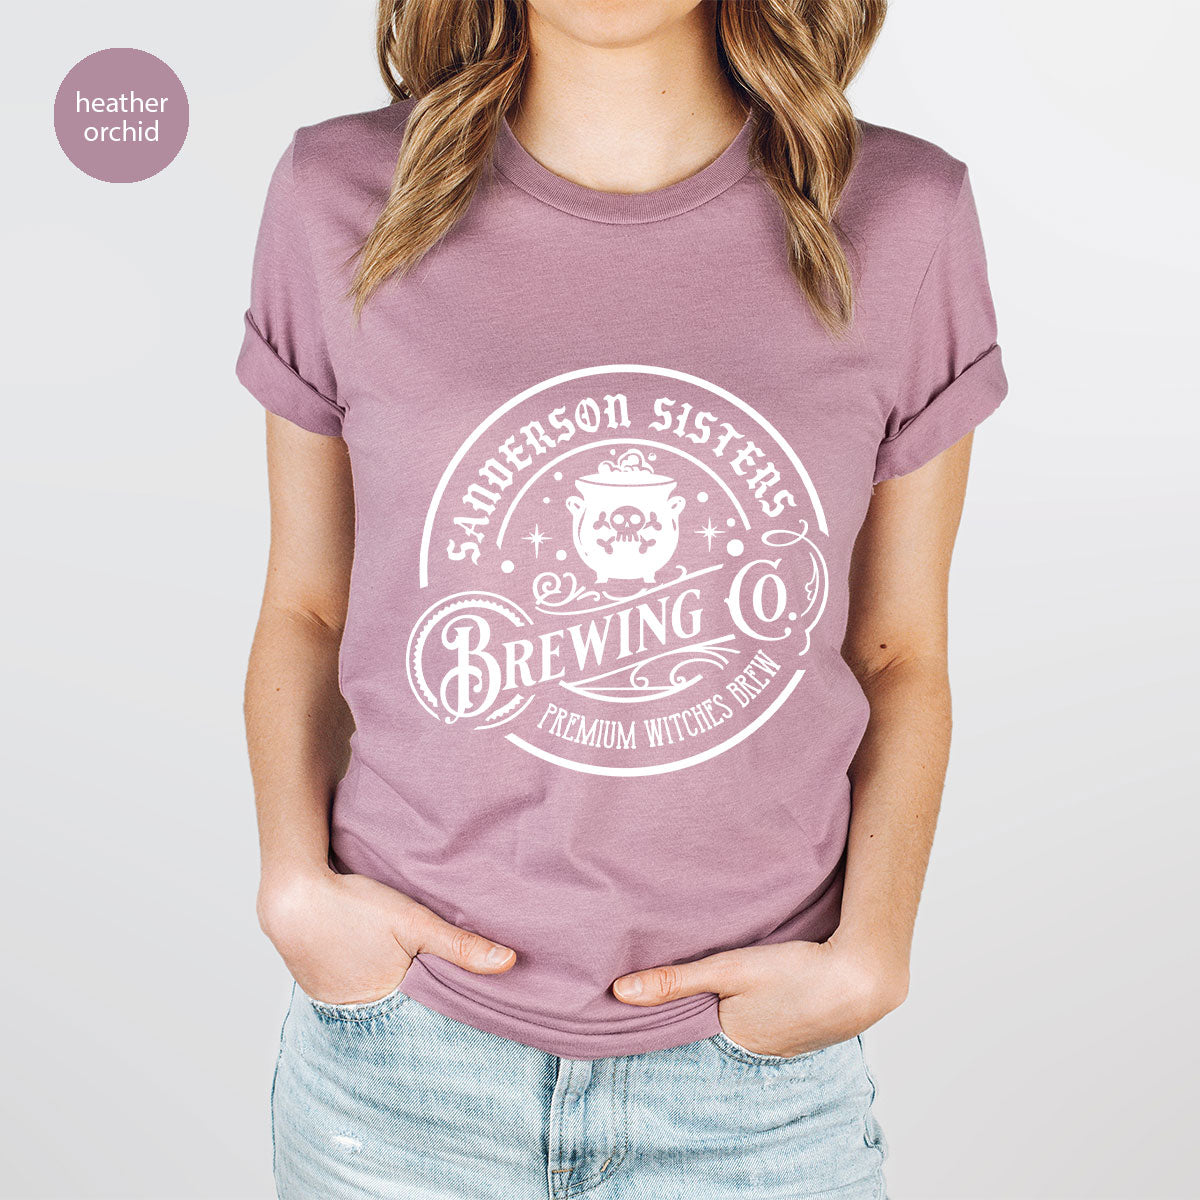 Witches Brew T-Shirt, Witchy Gifts for Her, Halloween Crewneck Sweatshirt, Girls Party Shirts, Spooky Season Graphic Tees, Womens Clothing